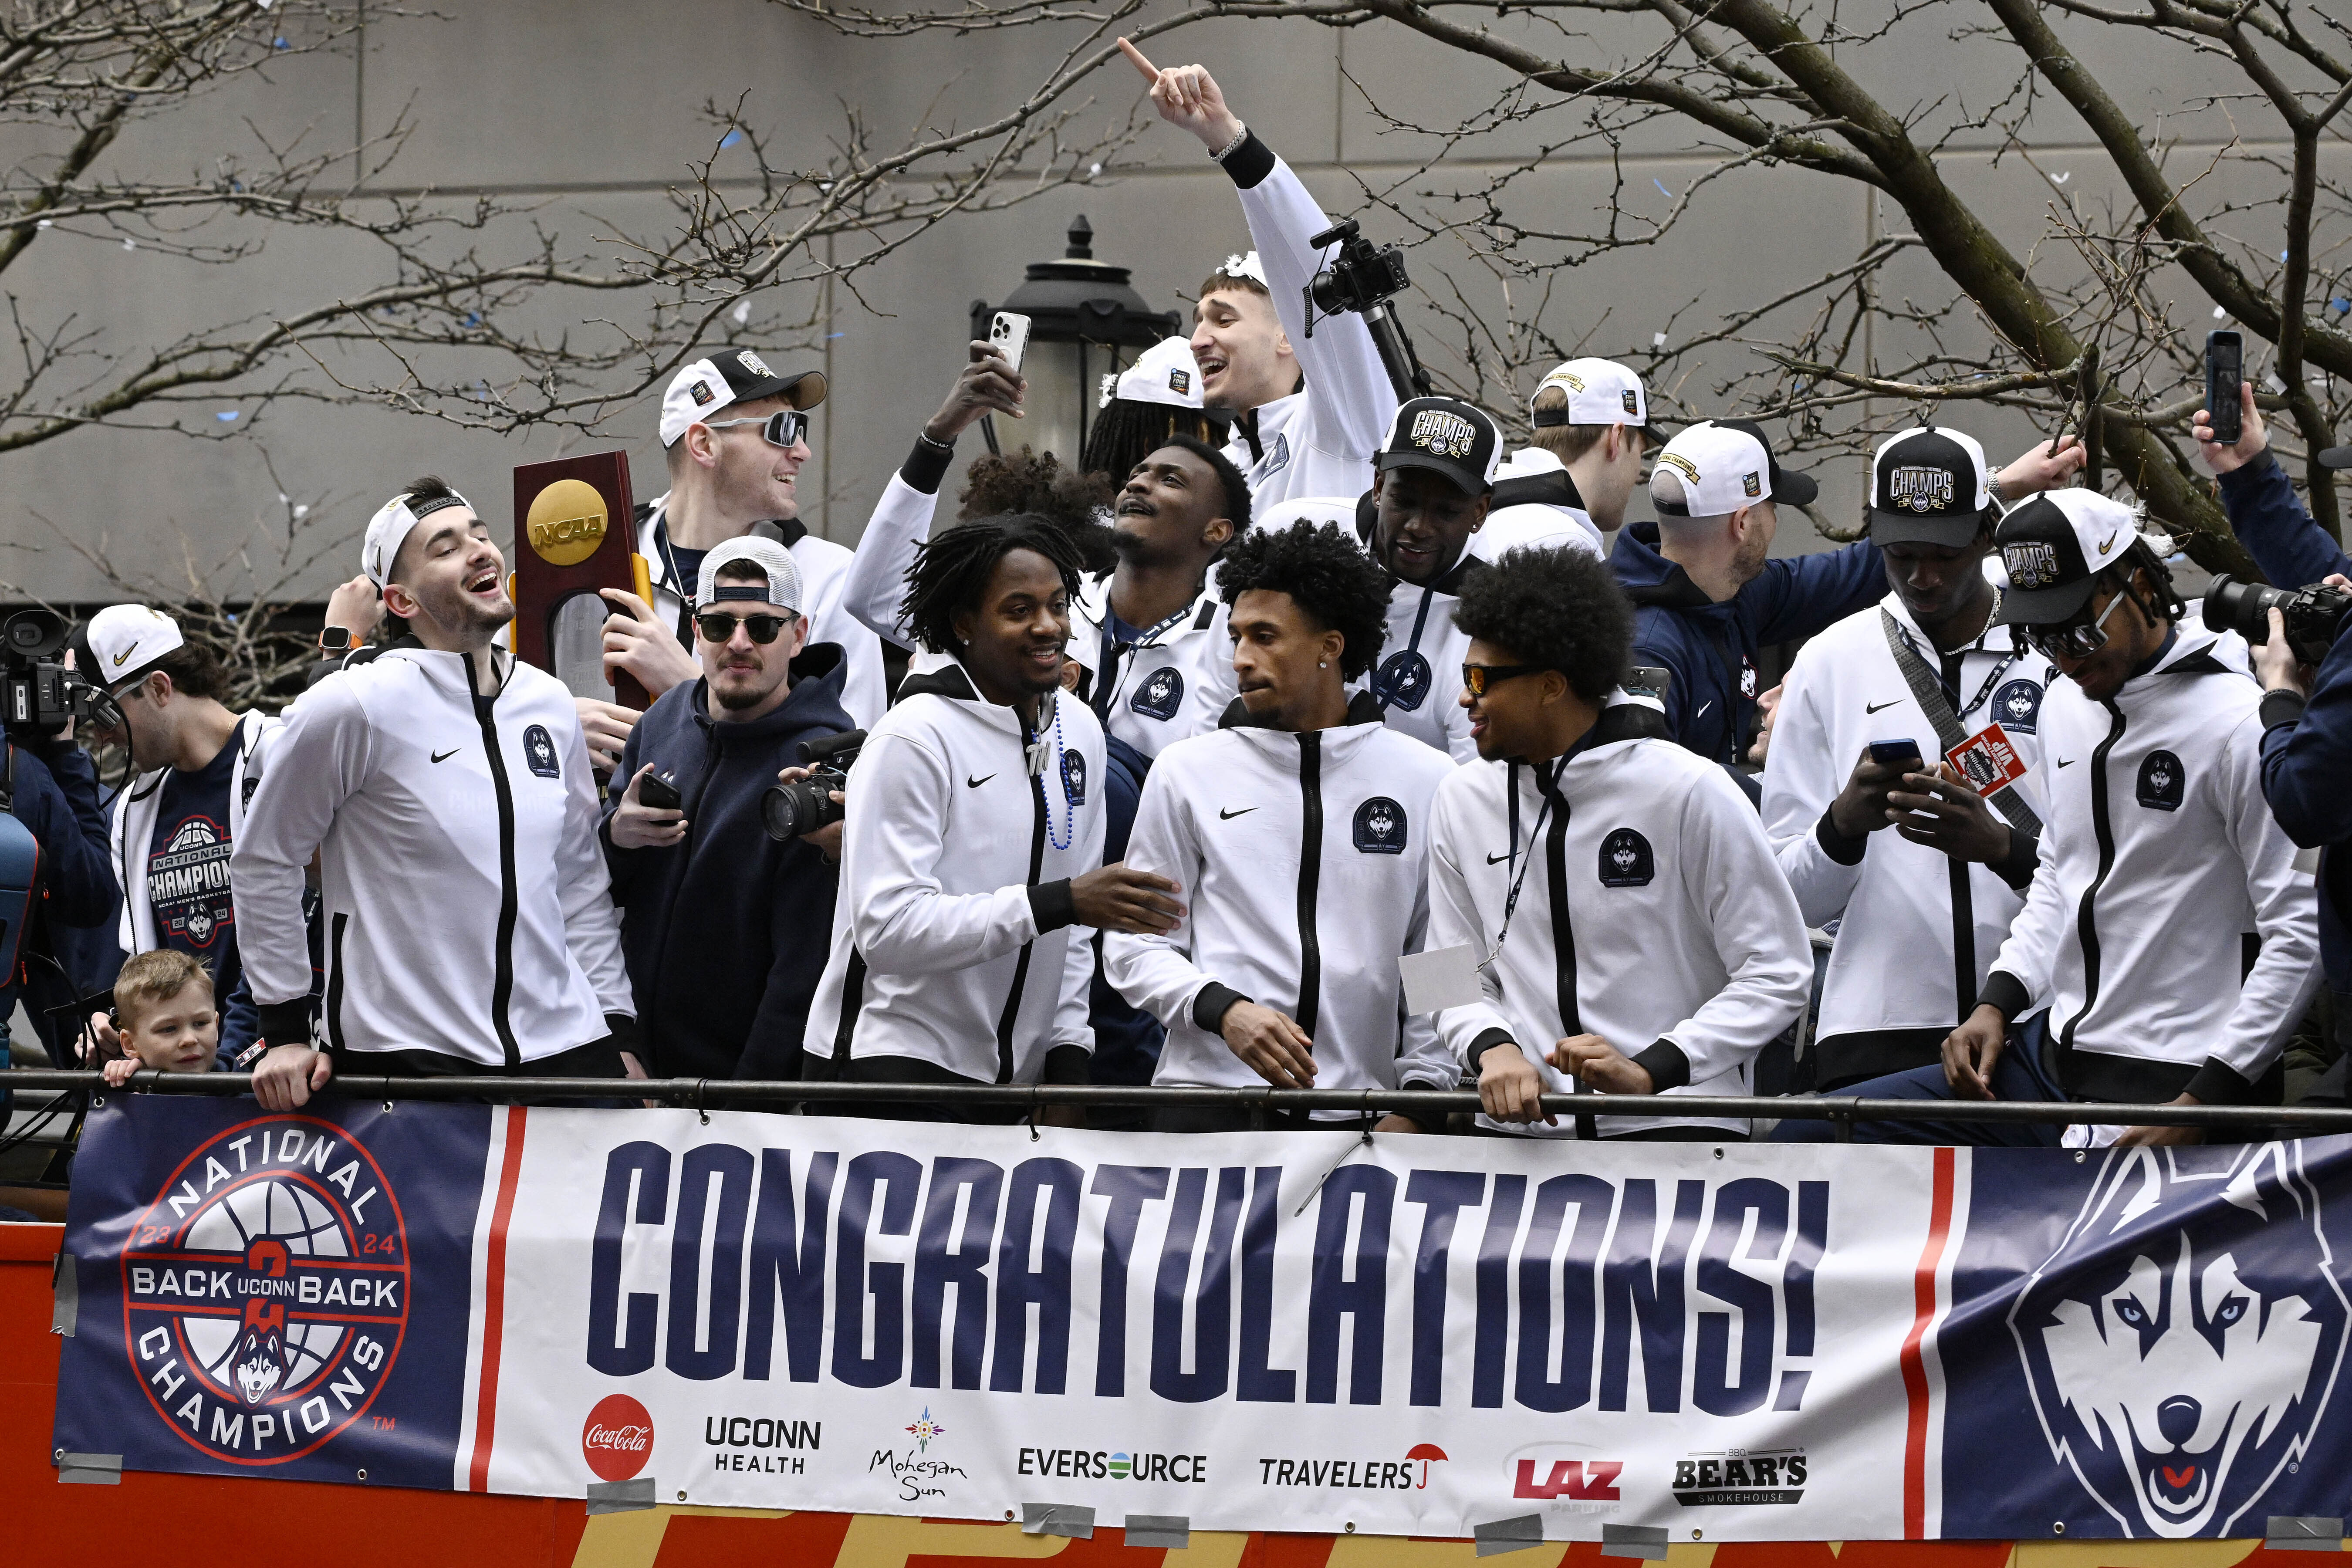 Back to back! UConn fans gather to celebrate another basketball